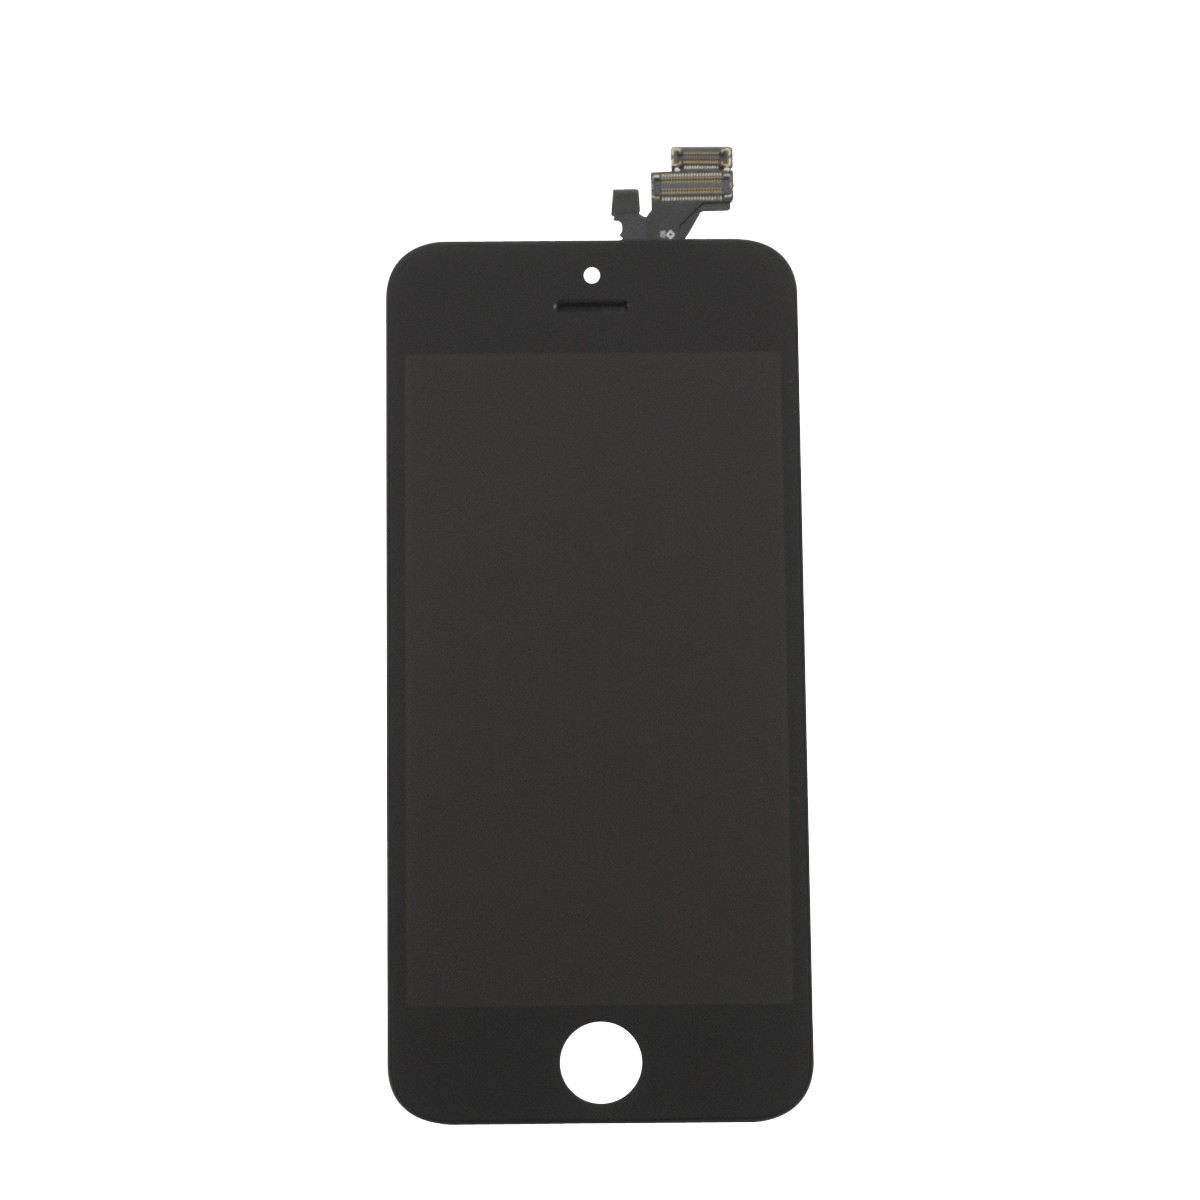 iPhone 5 LCD and Touch Screen Replacement